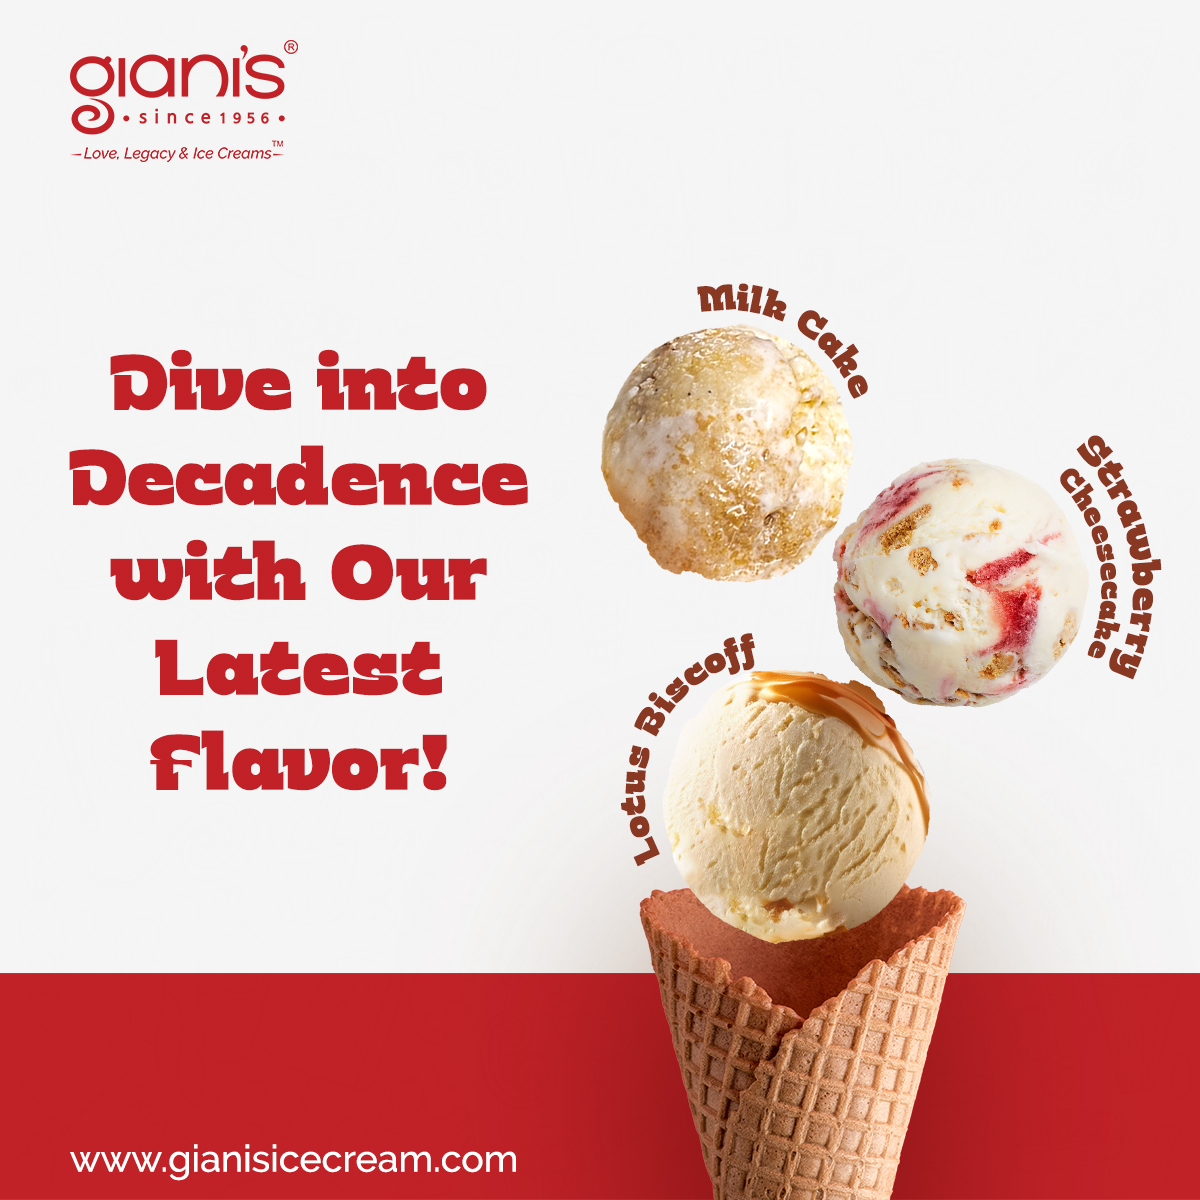 Gianis Introduces: Three Delicious New Ice Cream Flavours